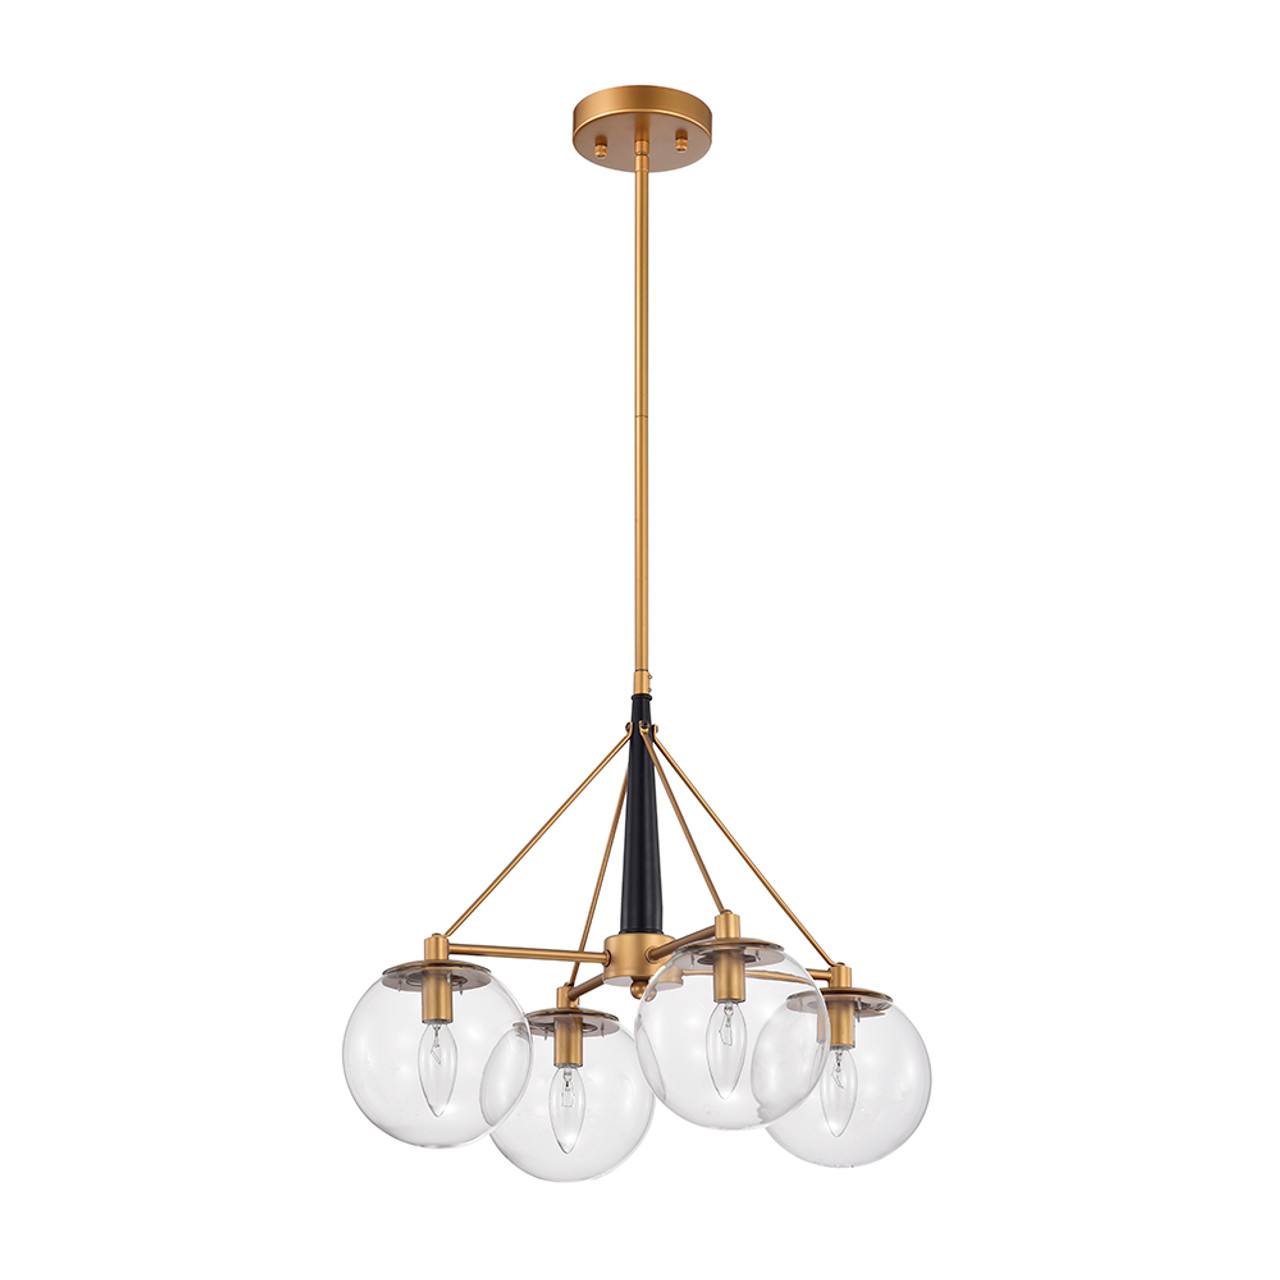 WAREHOUSE OF TIFFANY'S HM216/4BG Fidel 20 in. 4-Light Indoor Gold and Black Finish Chandelier with Light Kit